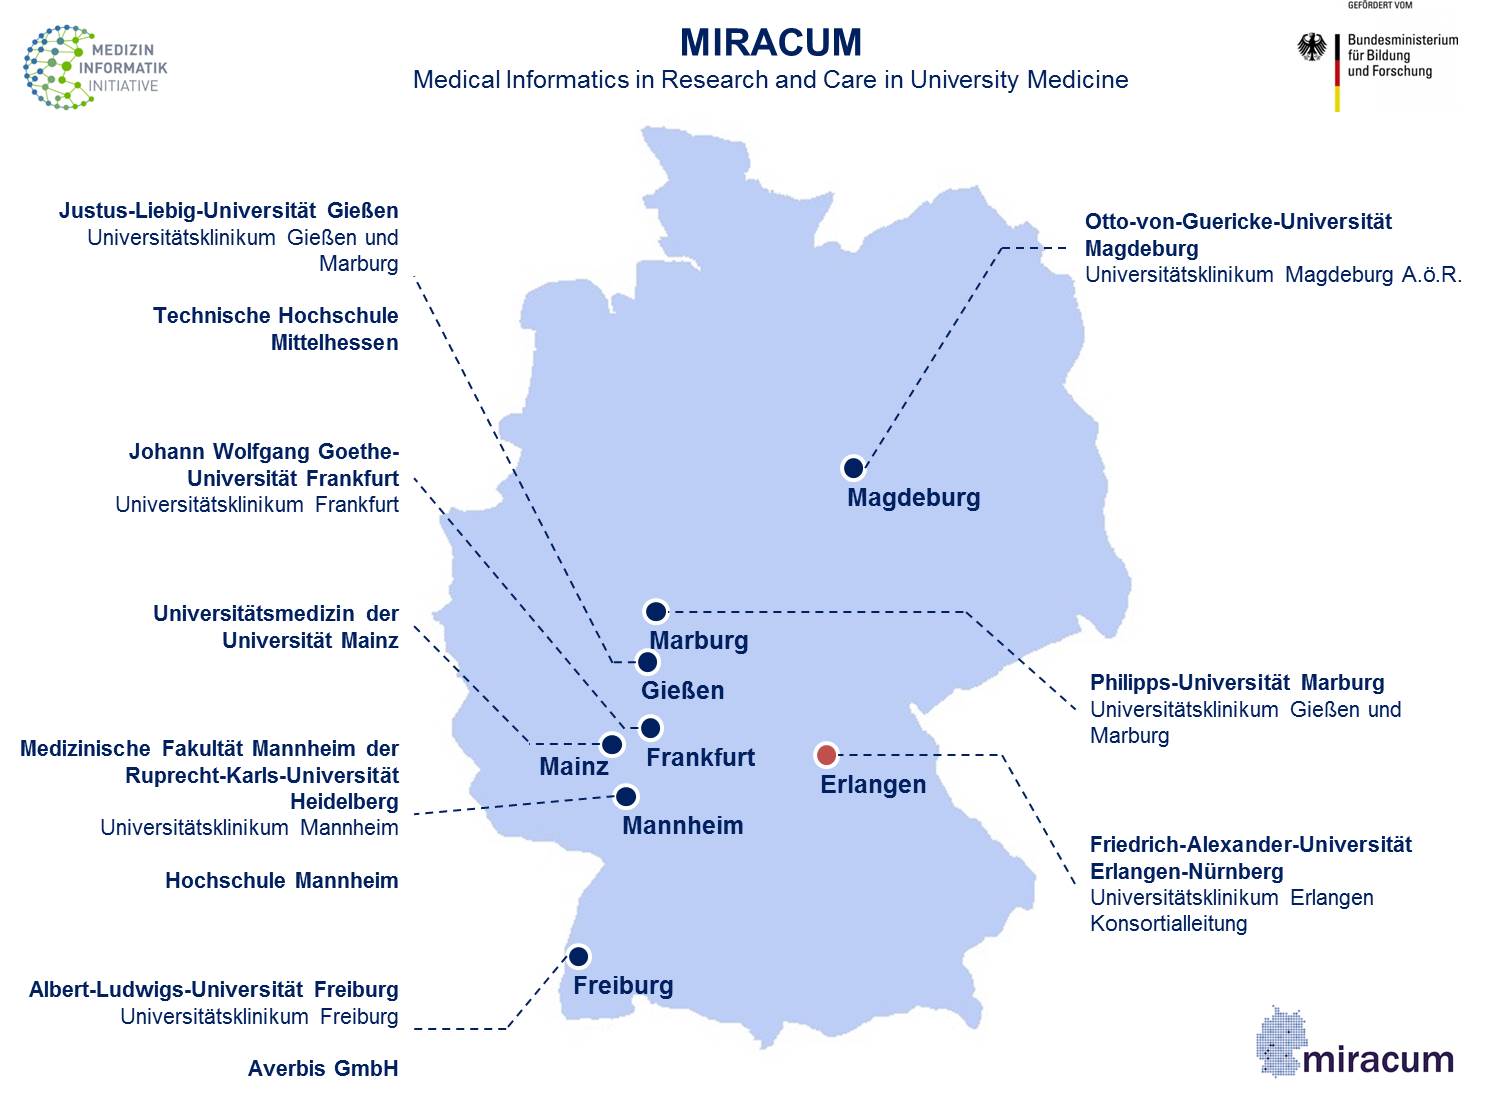 Towards entry "MIRACUM receives a funding of € 32.1 Mio for the German Medical Informatics Initiative (MI-I)"